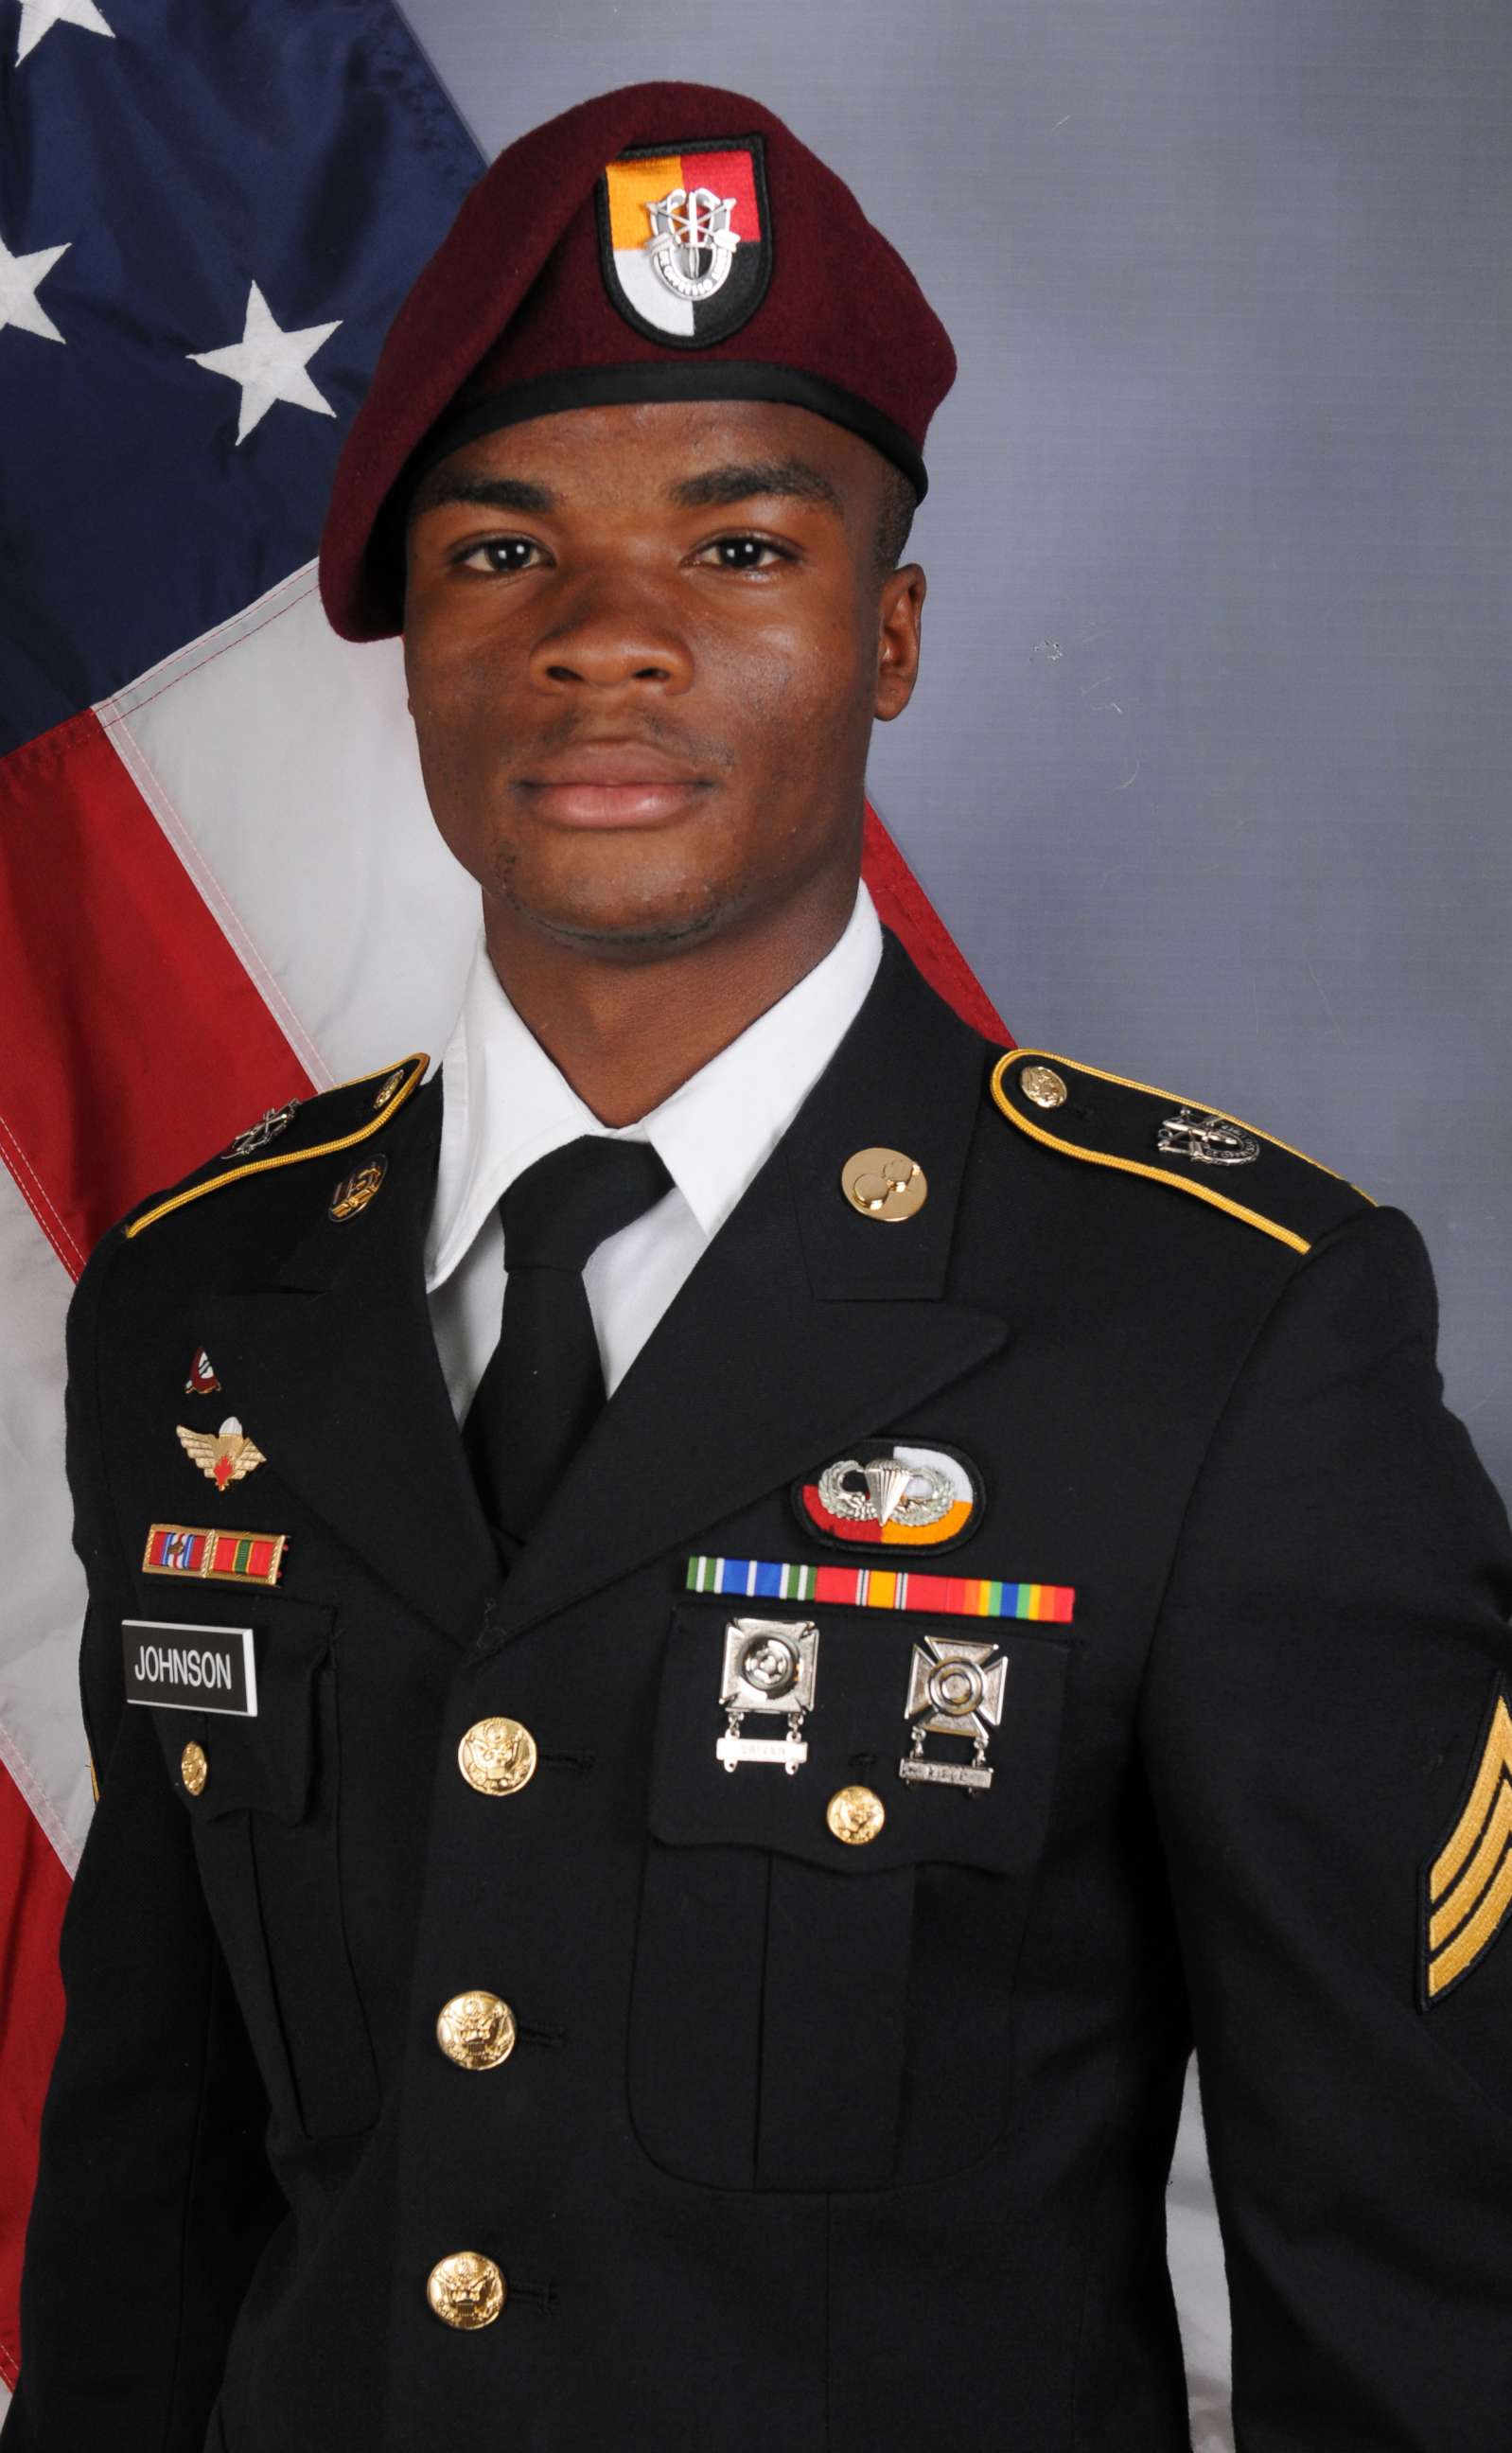 PHOTO: Sgt. La David Johnson, 25, died from wounds sustained during enemy contact. He was assigned to 3rd Special Forces Group (Airborne) on Fort Bragg.